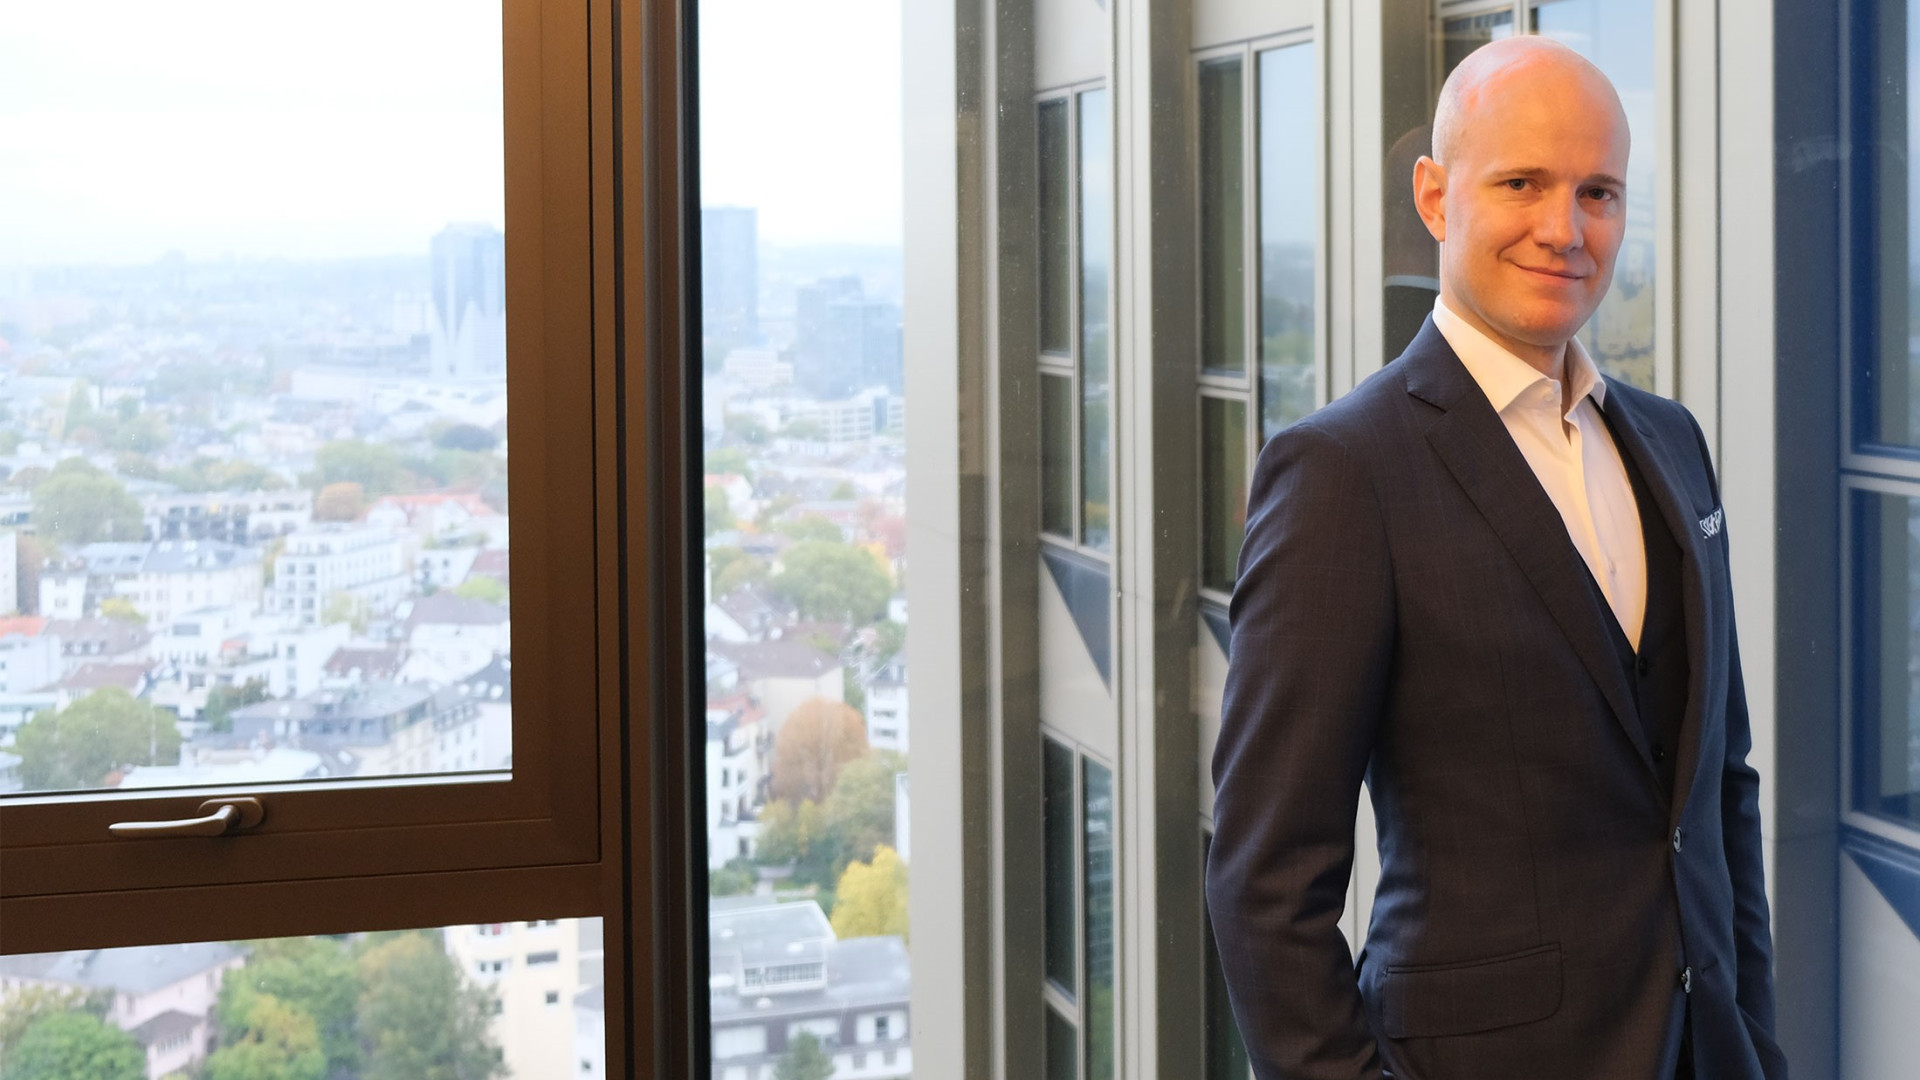 hkp/// group Senior Director Oliver Baierl stands in front of the window front on the 20th floor of Tower 185 in Frankfurt.